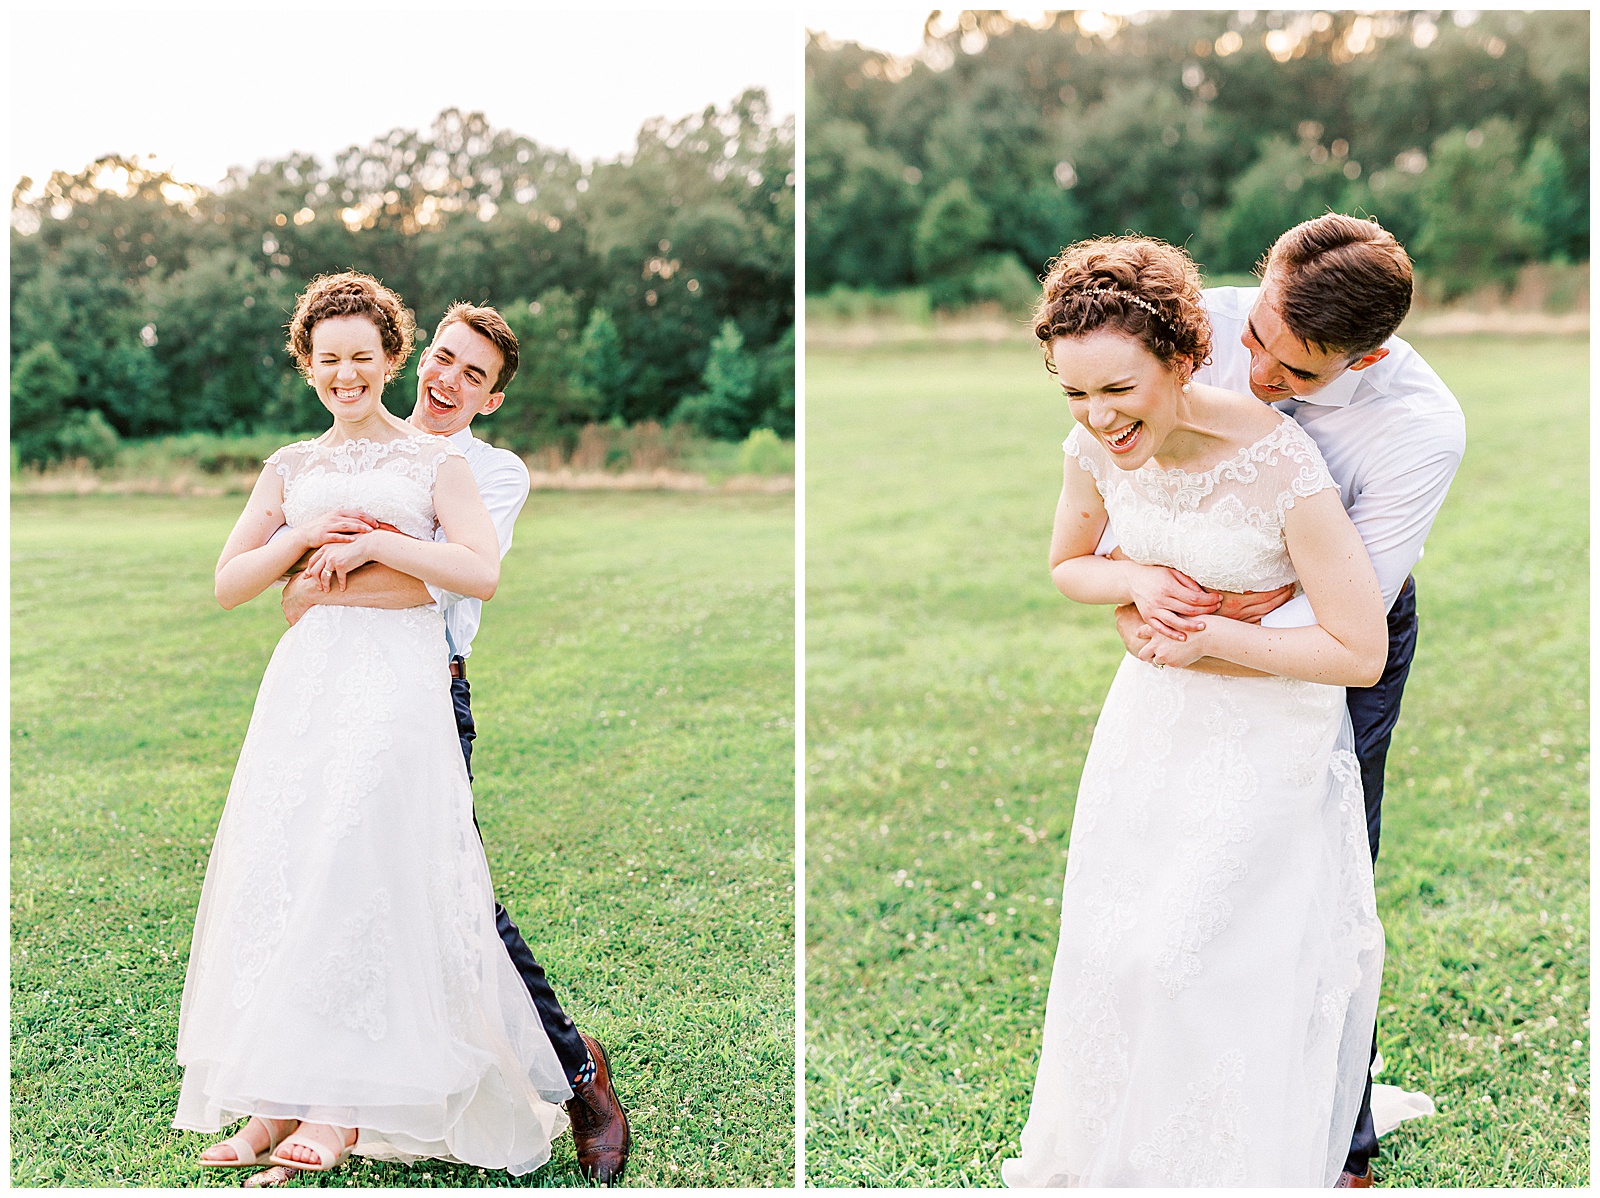 summer sunset in field wedding day bride groom portraits with curly short haired bride with lace wedding dress and navy blue suit groom